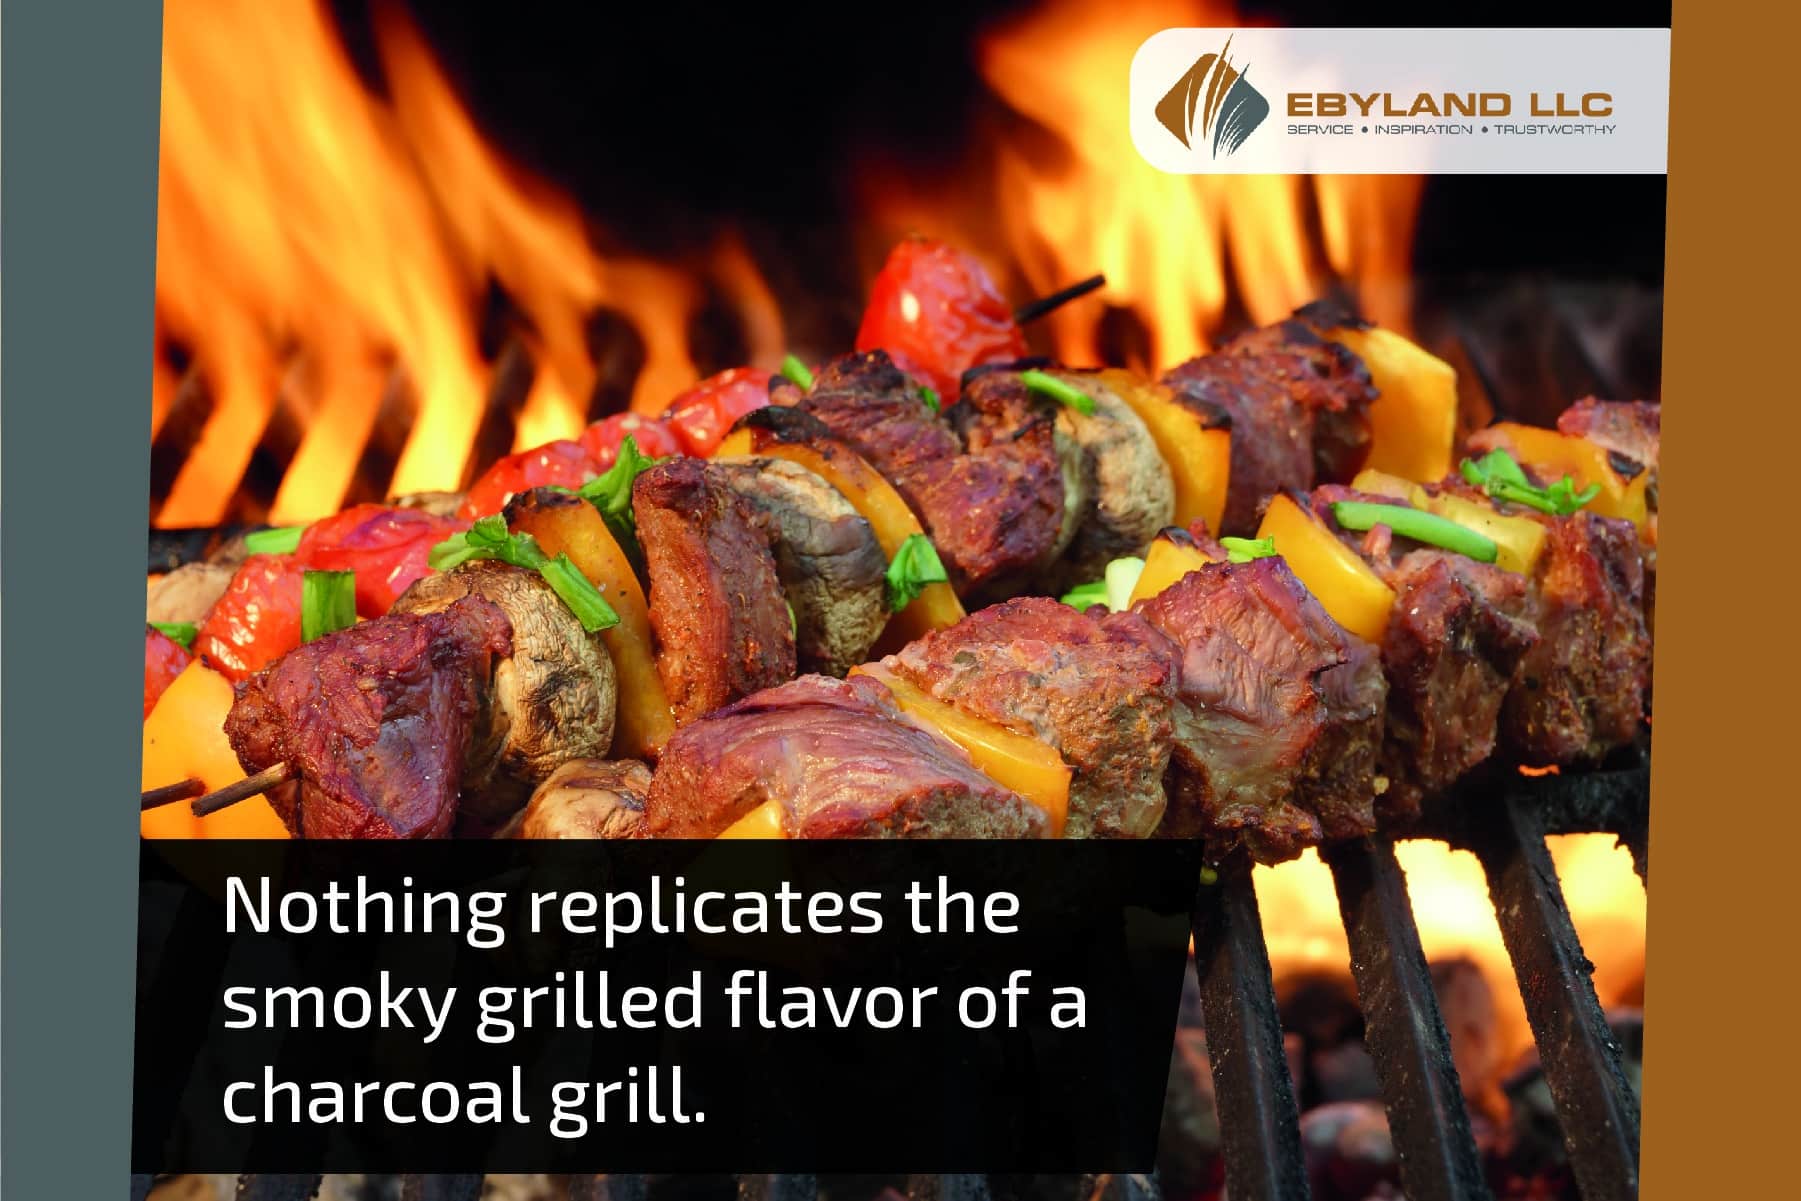 Charcoal grills are the best for a smoky flavor